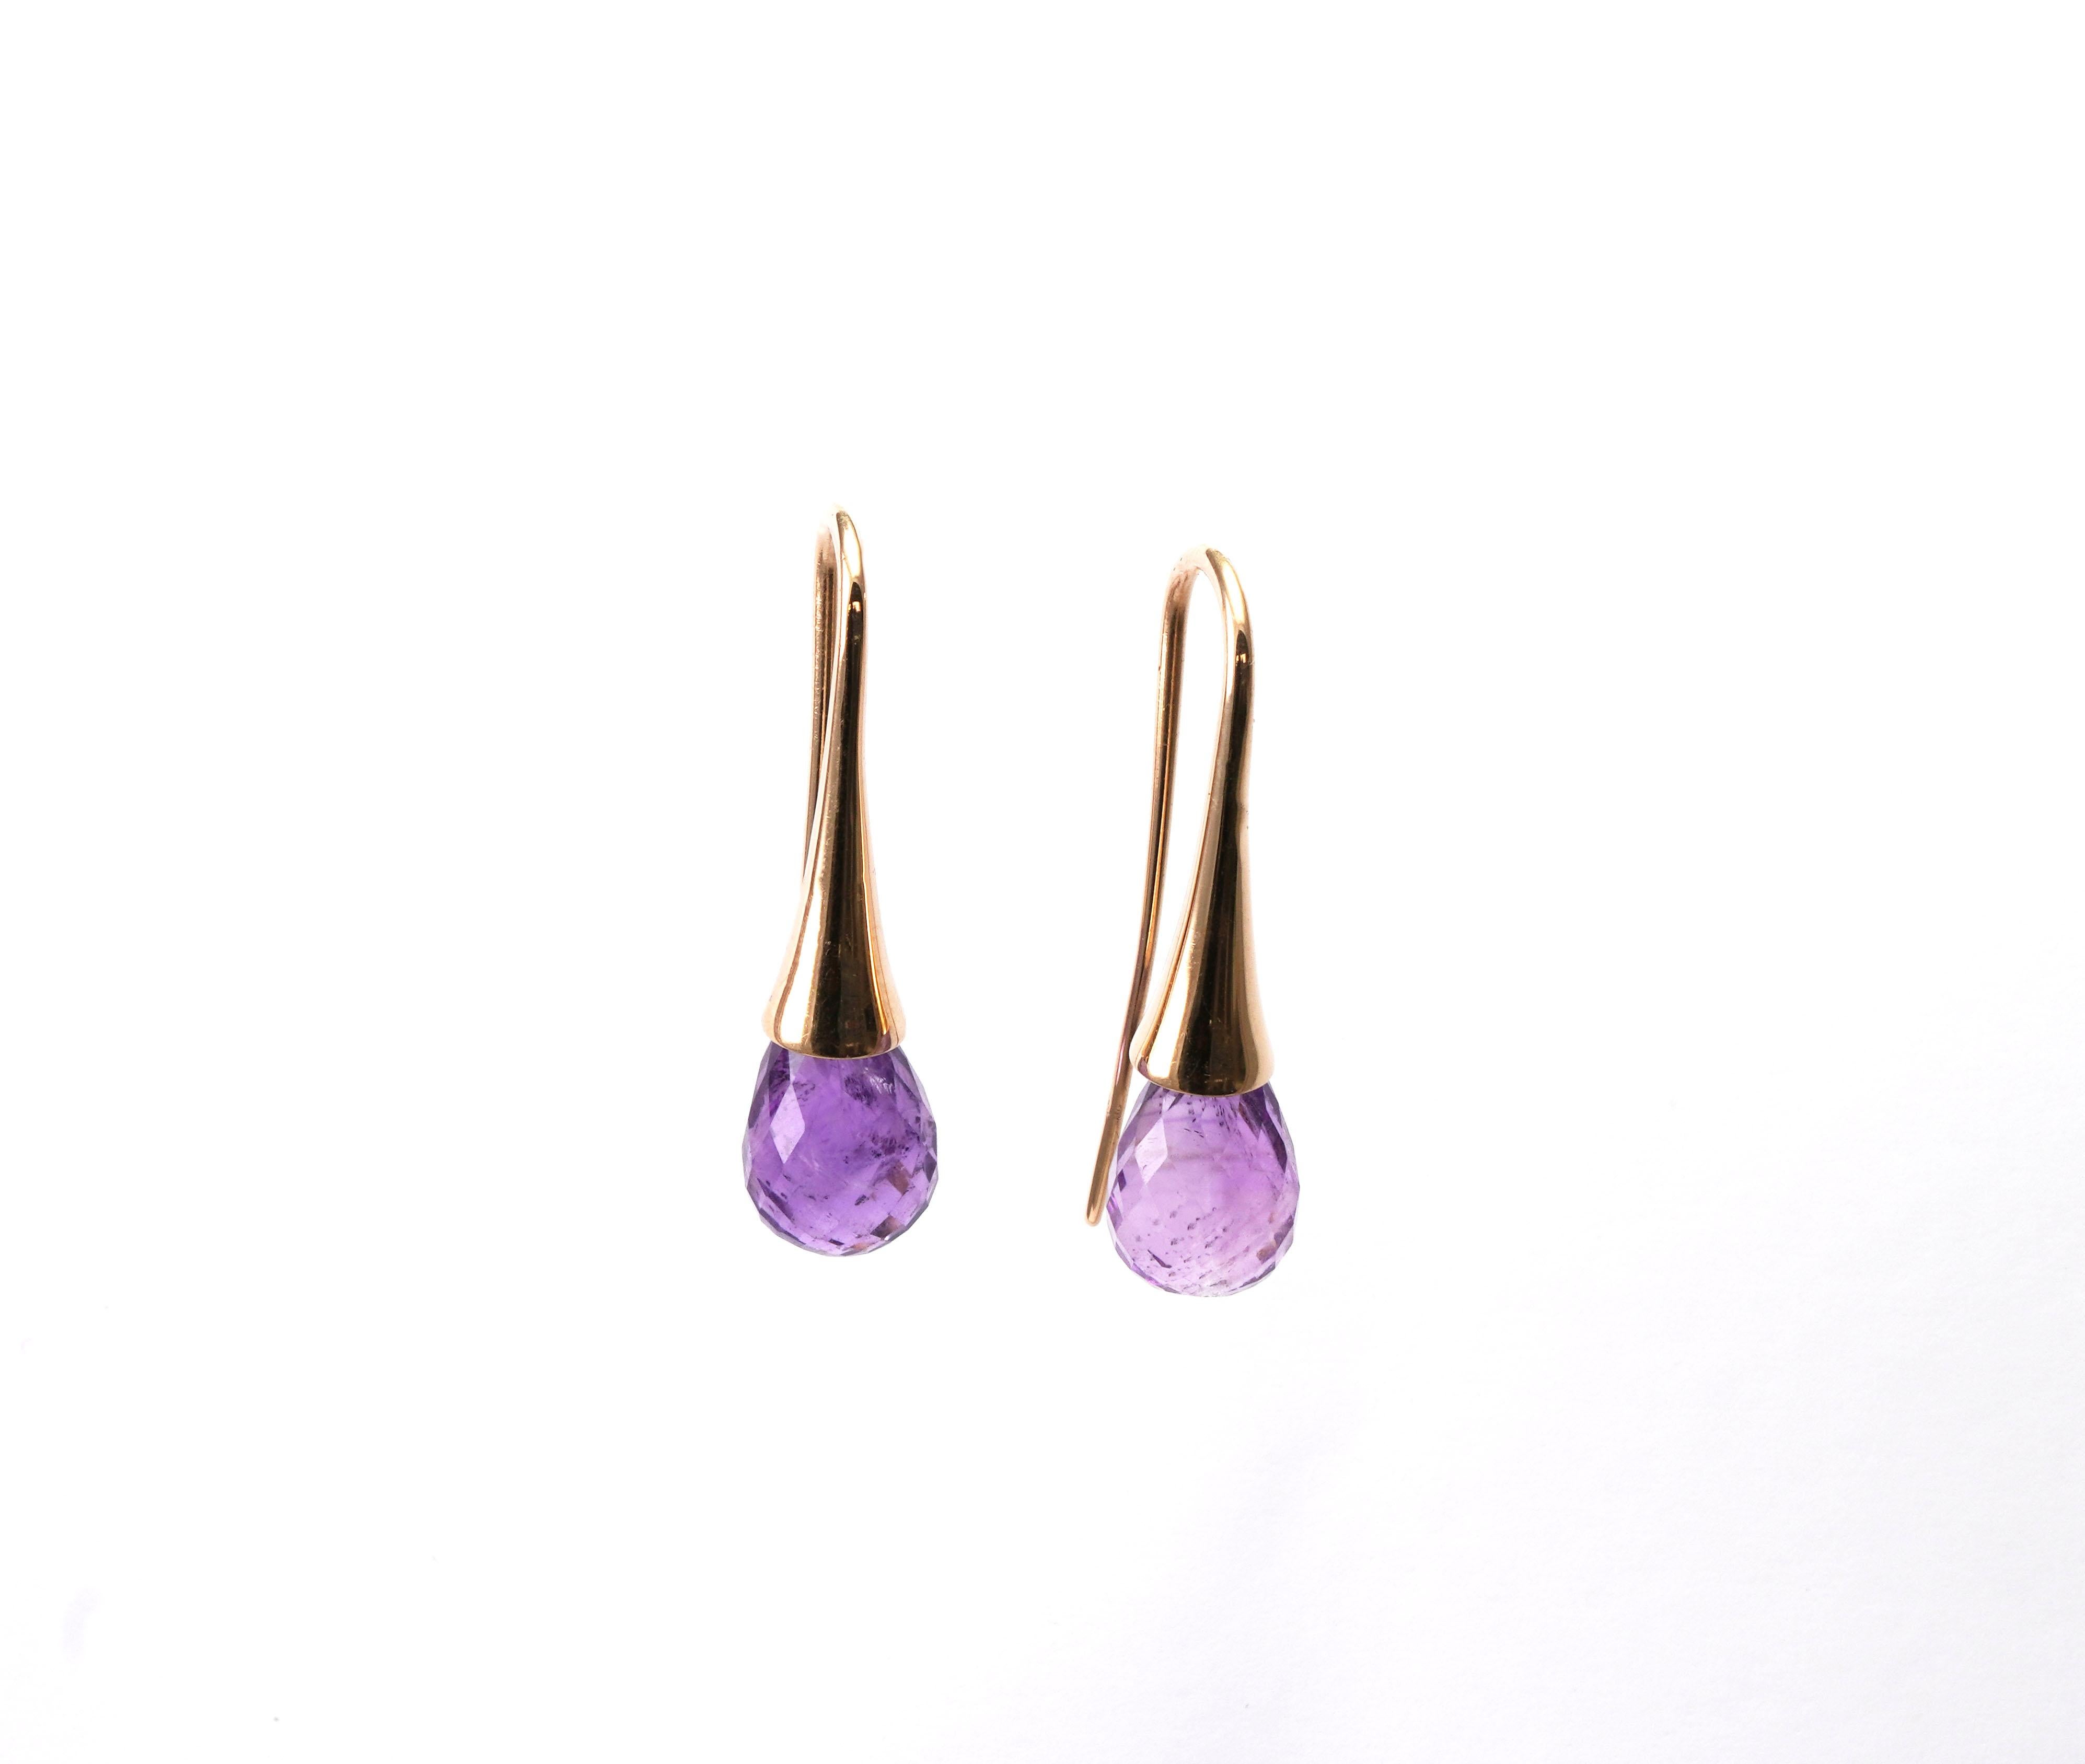 14 kt gold pair of earrings with Amethyst
The Gemstone is not Static - It is movable
Gold color: Yellow
Dimensions: 30 mm height
Total weight: 4.45 grams

Set with:
- Amethyst
Cut: Briolette
Color: Purple